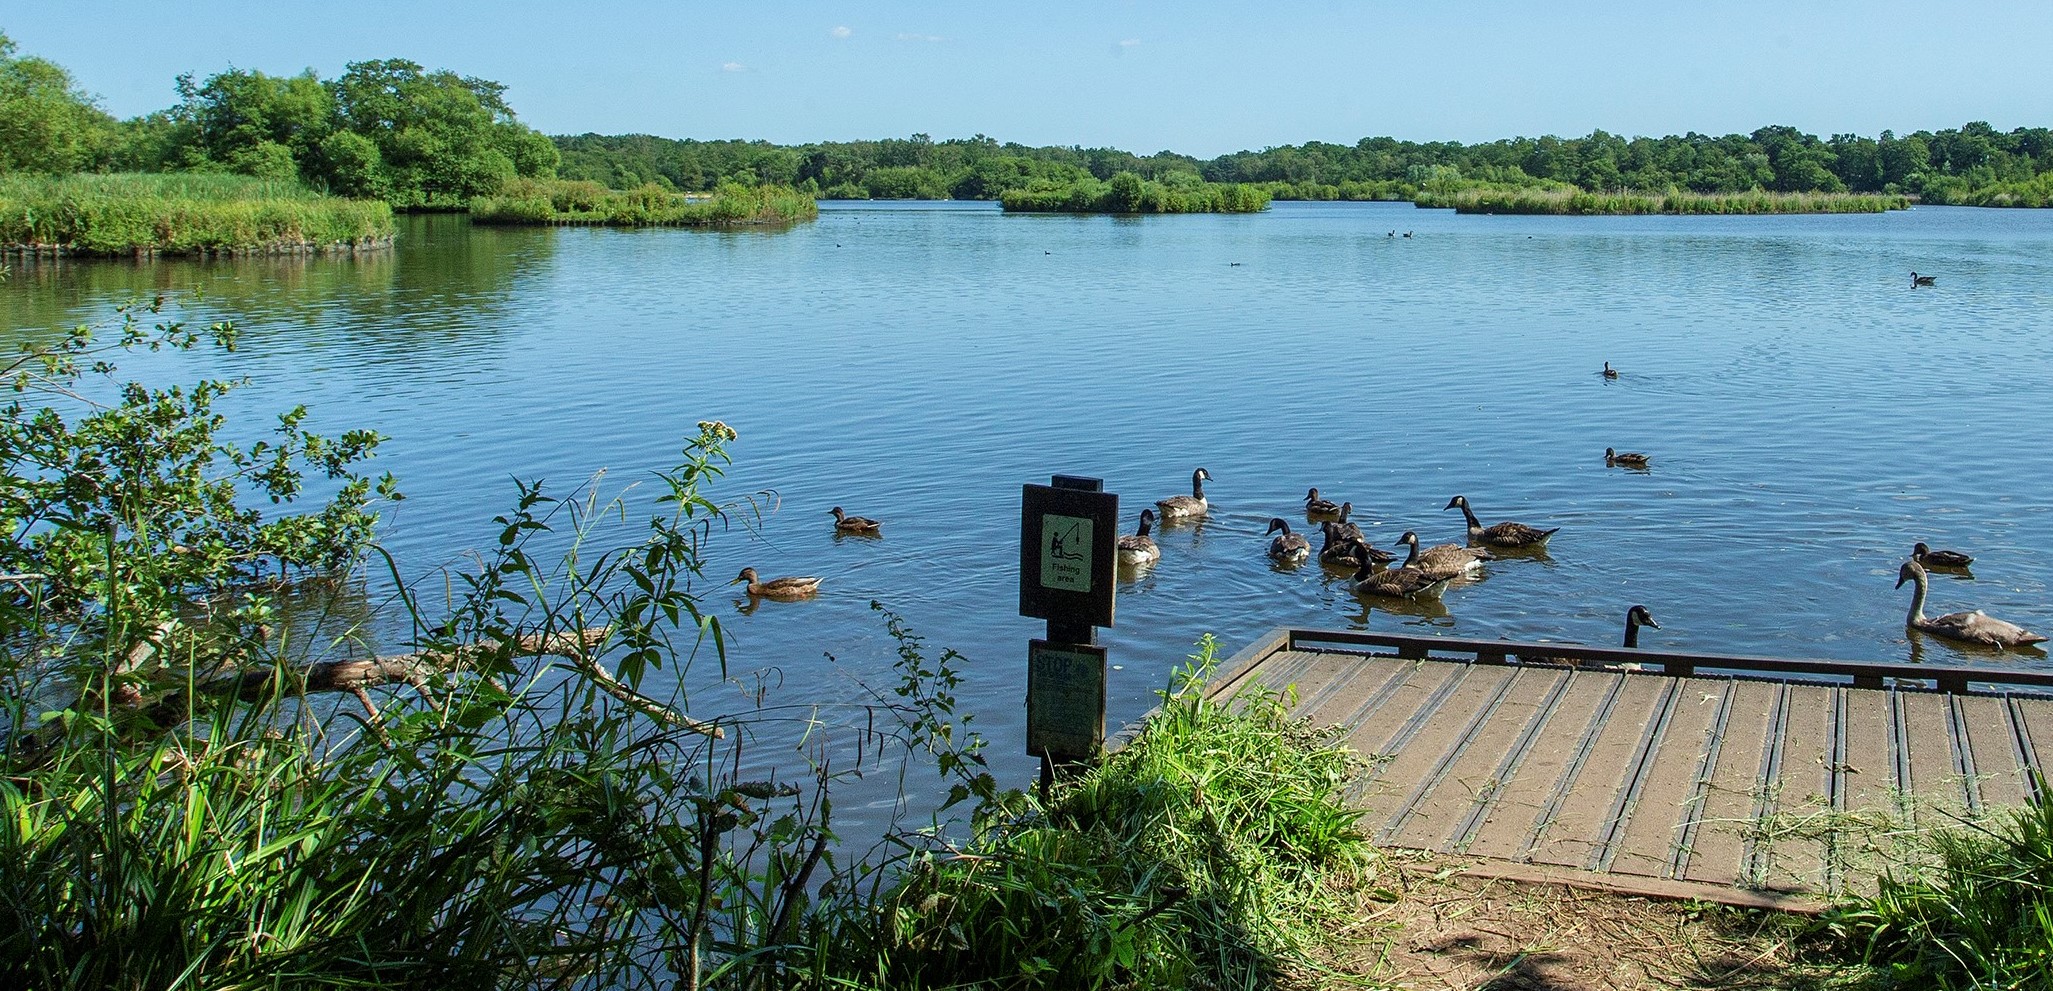 A view of Fleet Pond with ducks in foreground